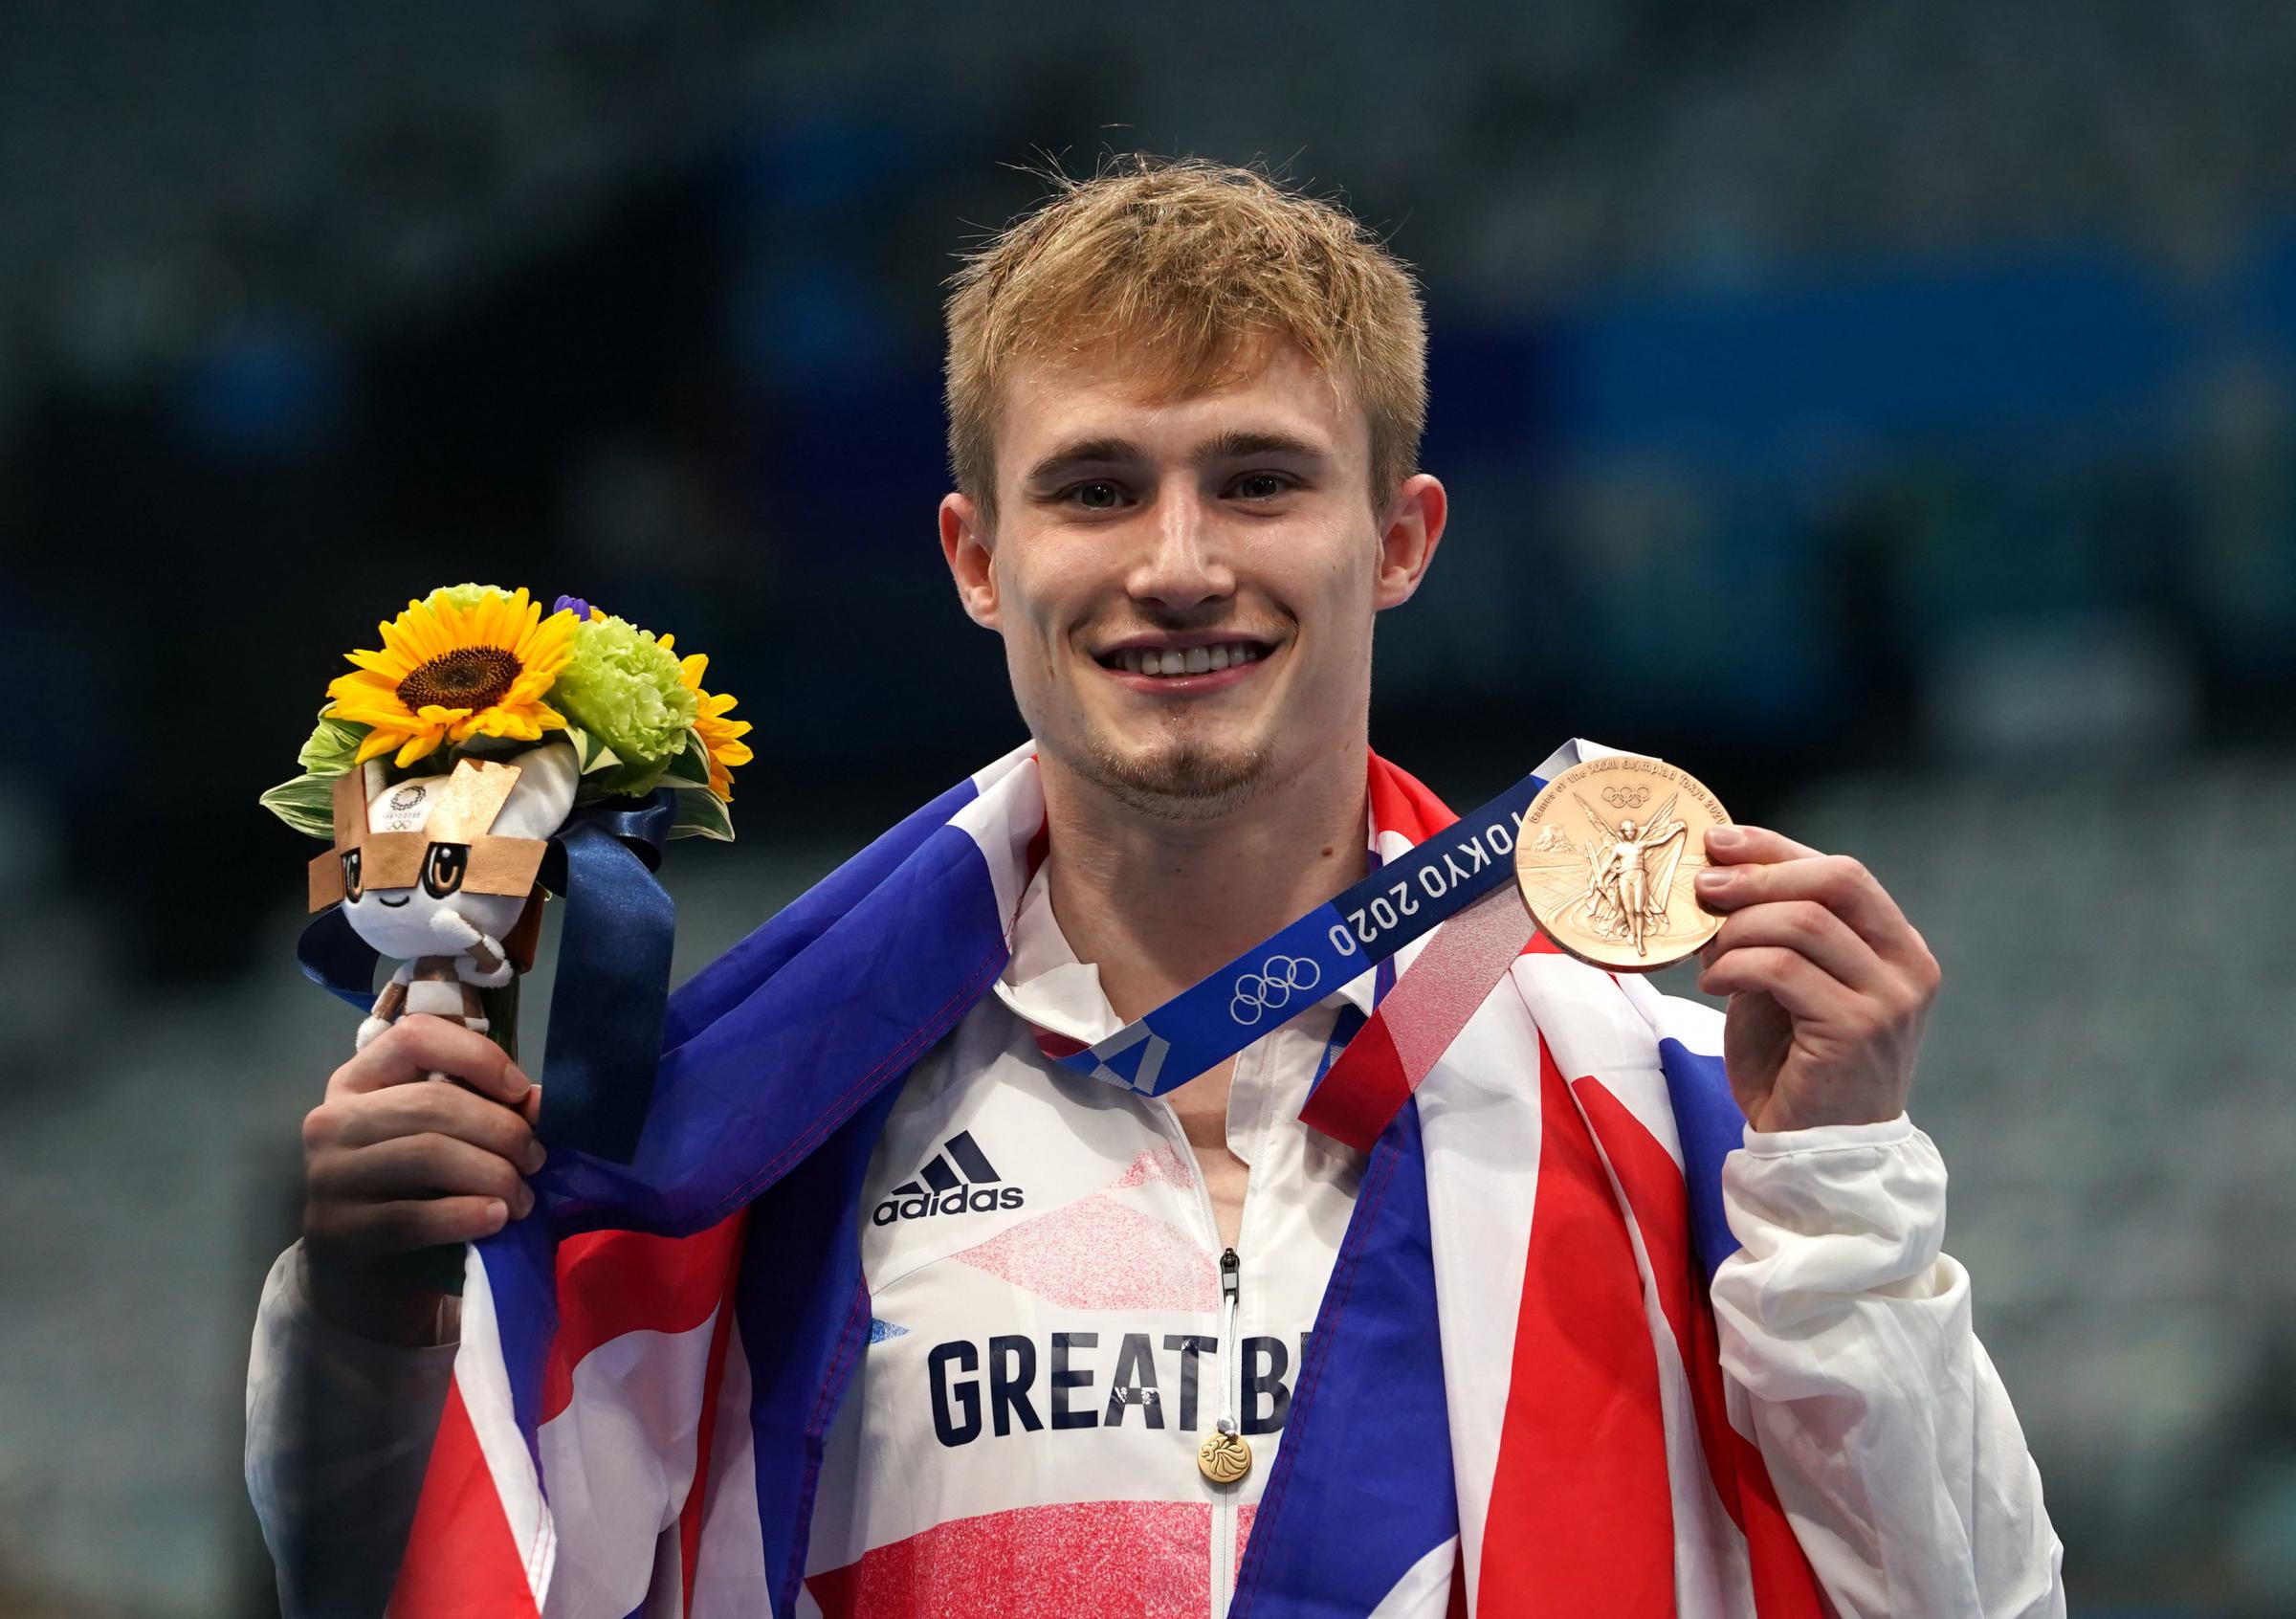 The new pool is being named in honour of Olympic diver Jack Laugher. Hes pictured on the podium with the bronze medal for the Mens 3m Springboard at Tokyo Aquatics Centre last year